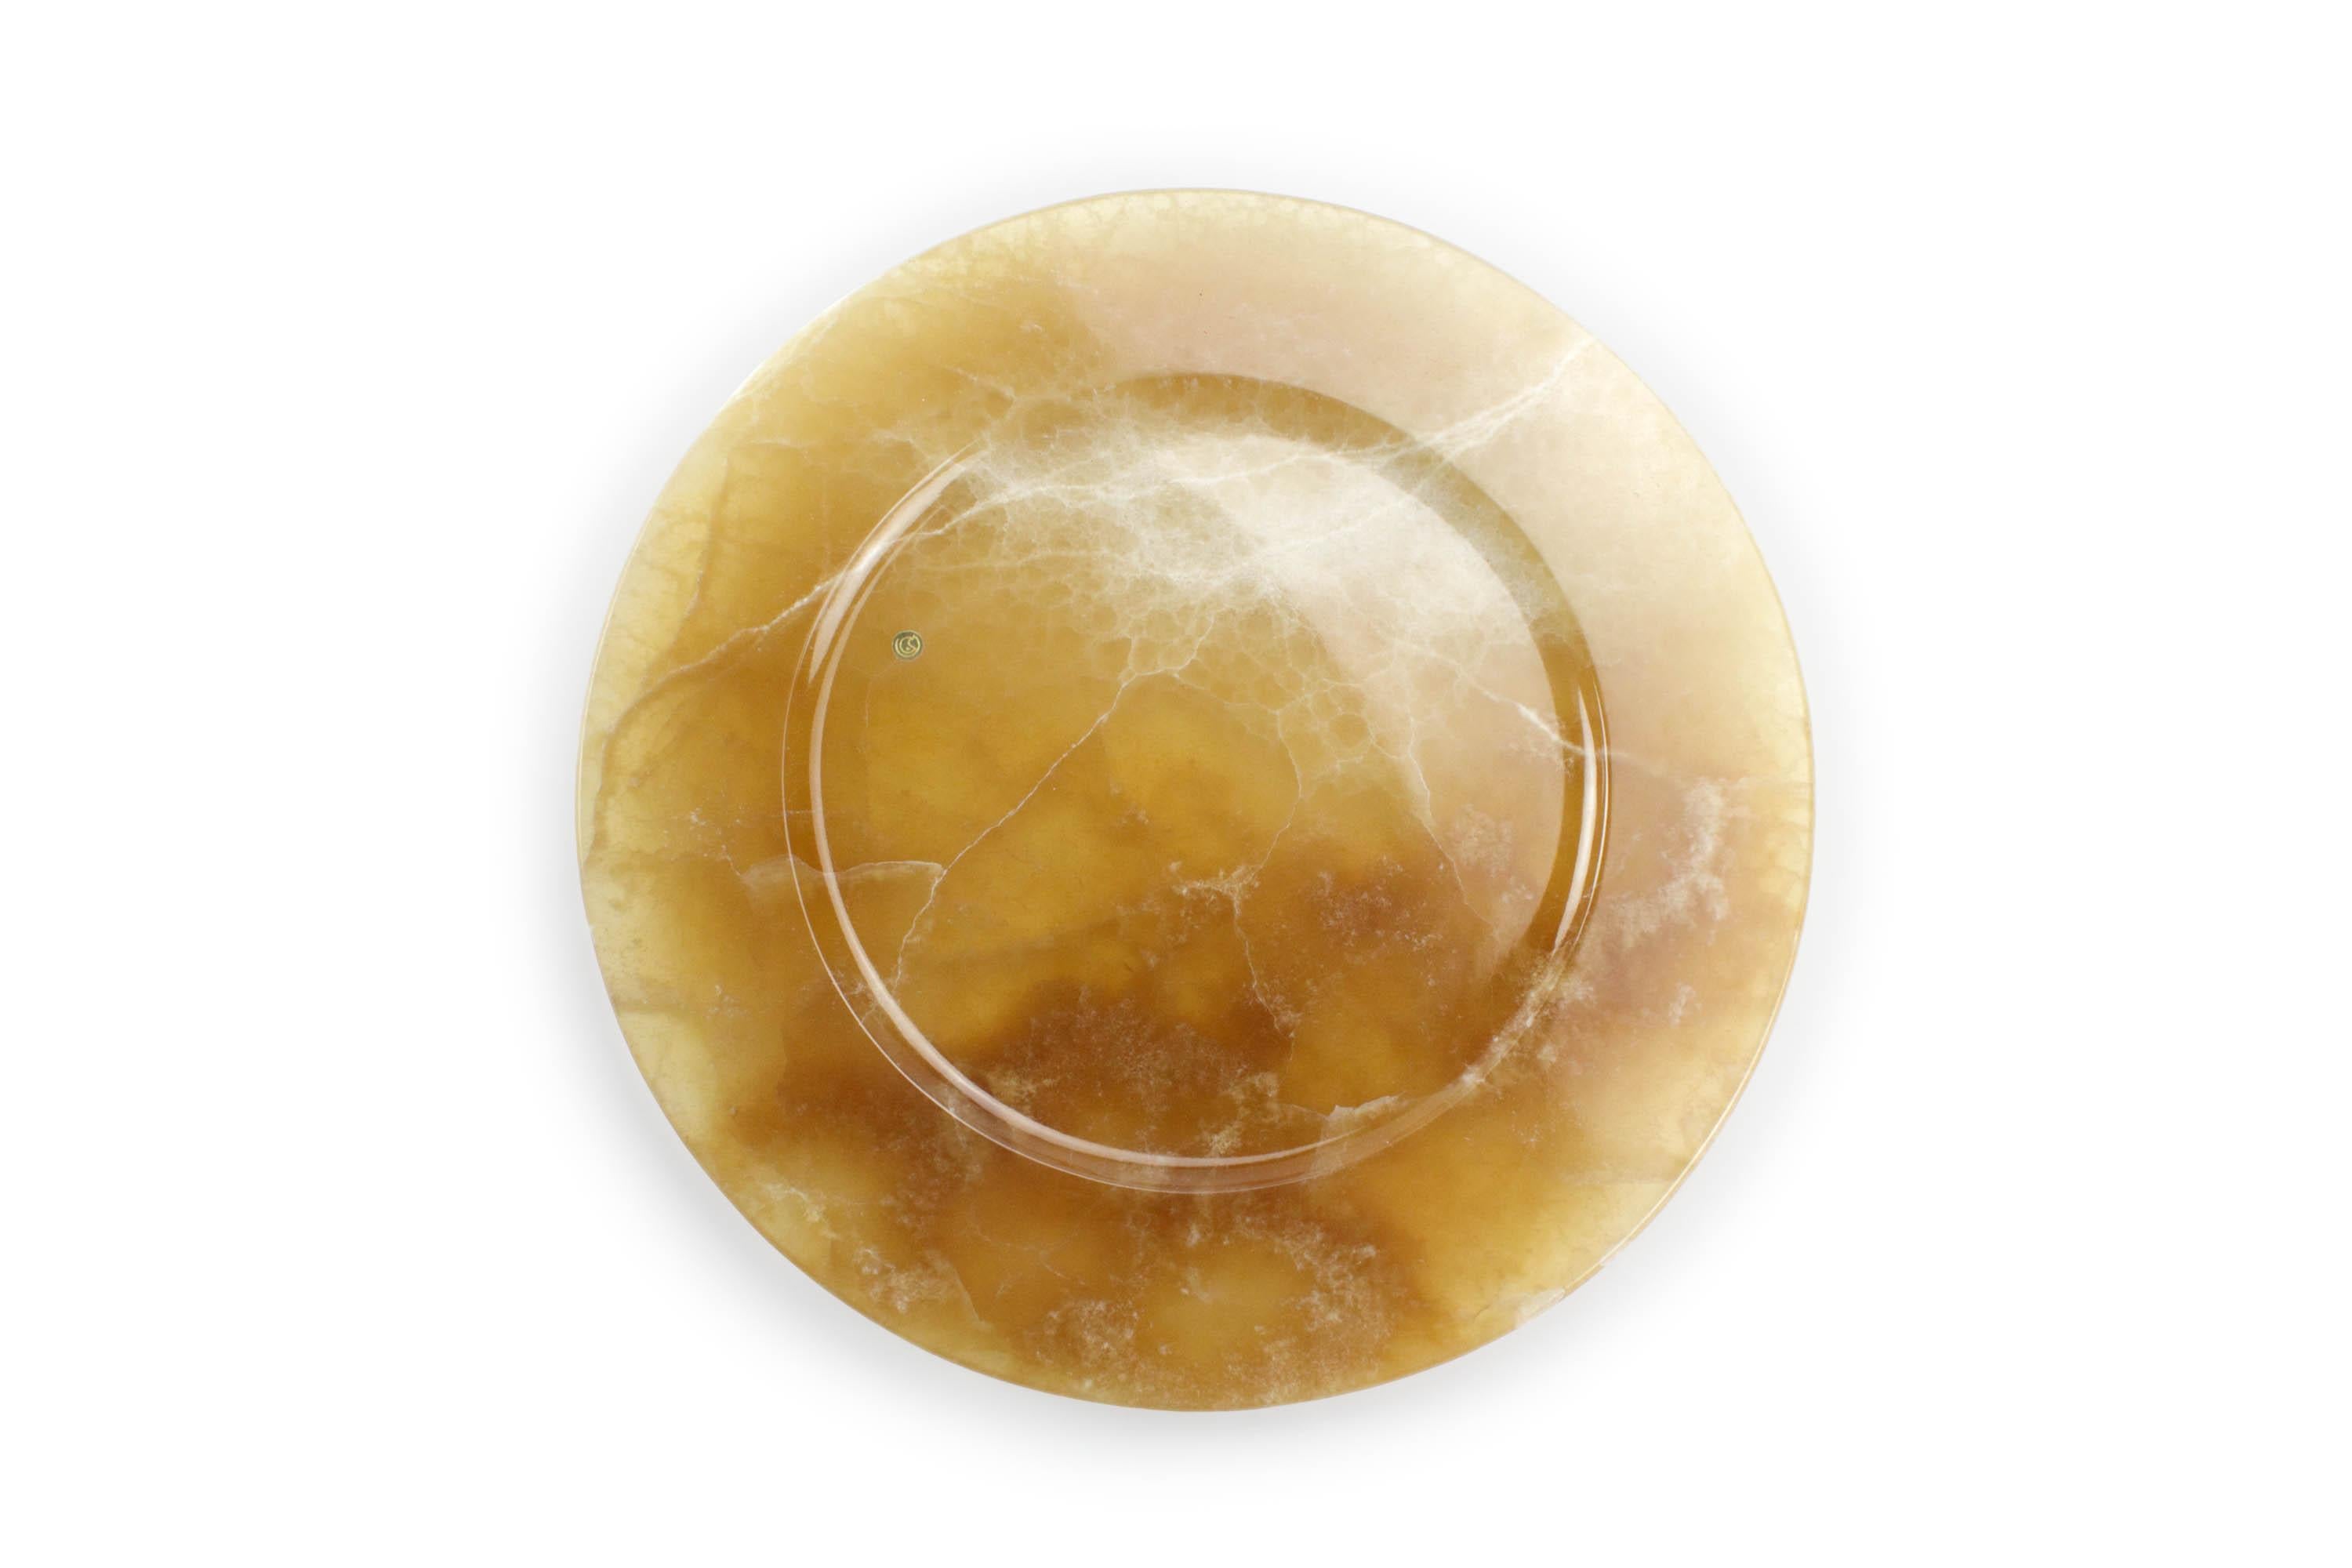 Charger Plate Platters Serveware Set of 4 Amber Onyx Marble Handmade Italy In New Condition For Sale In Ancona, Marche